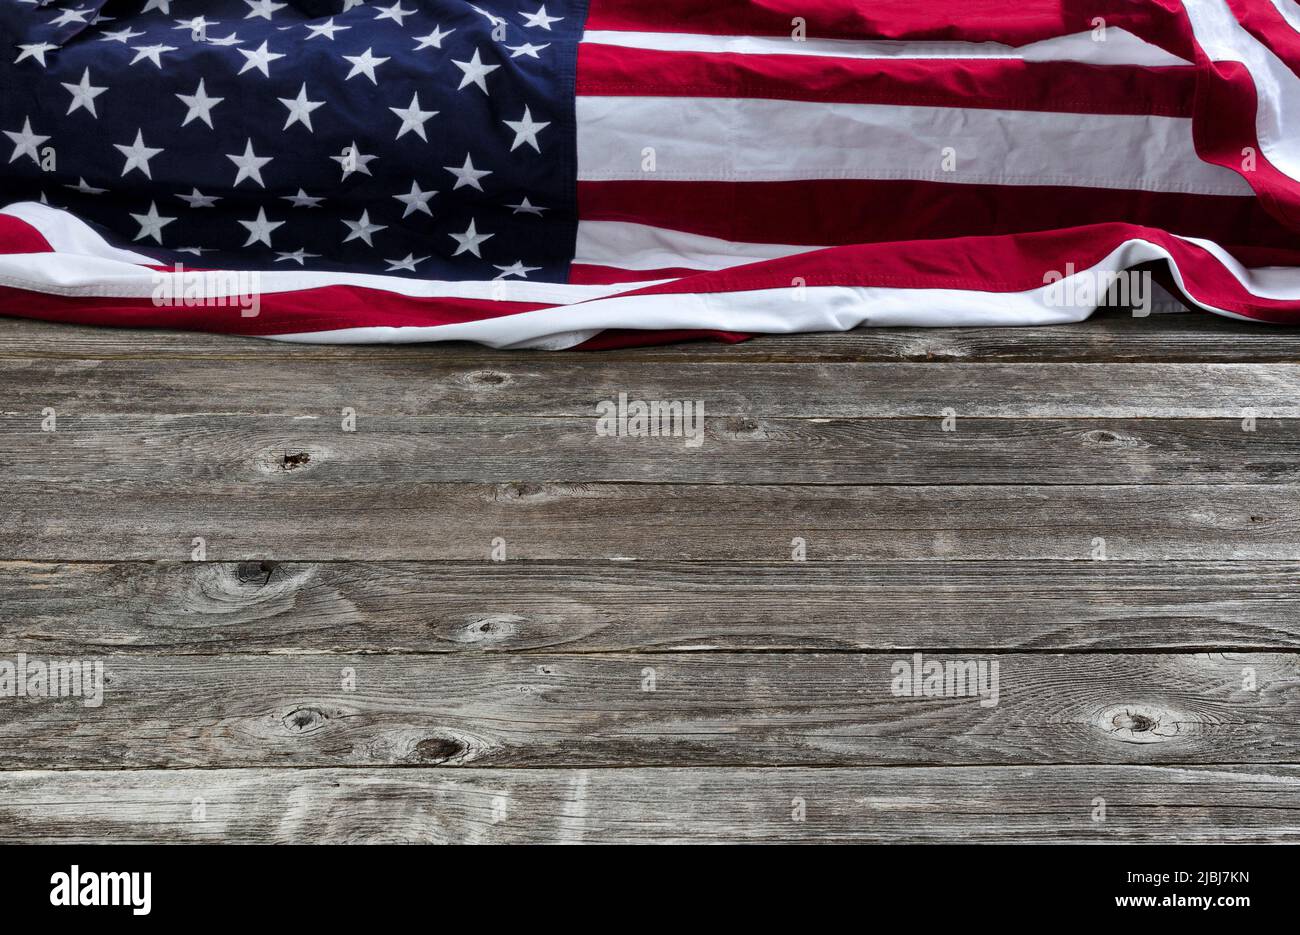 Concept background for 4th of July, labor, veteran, Memorial or Independence Day holiday celebration in United States of America Stock Photo